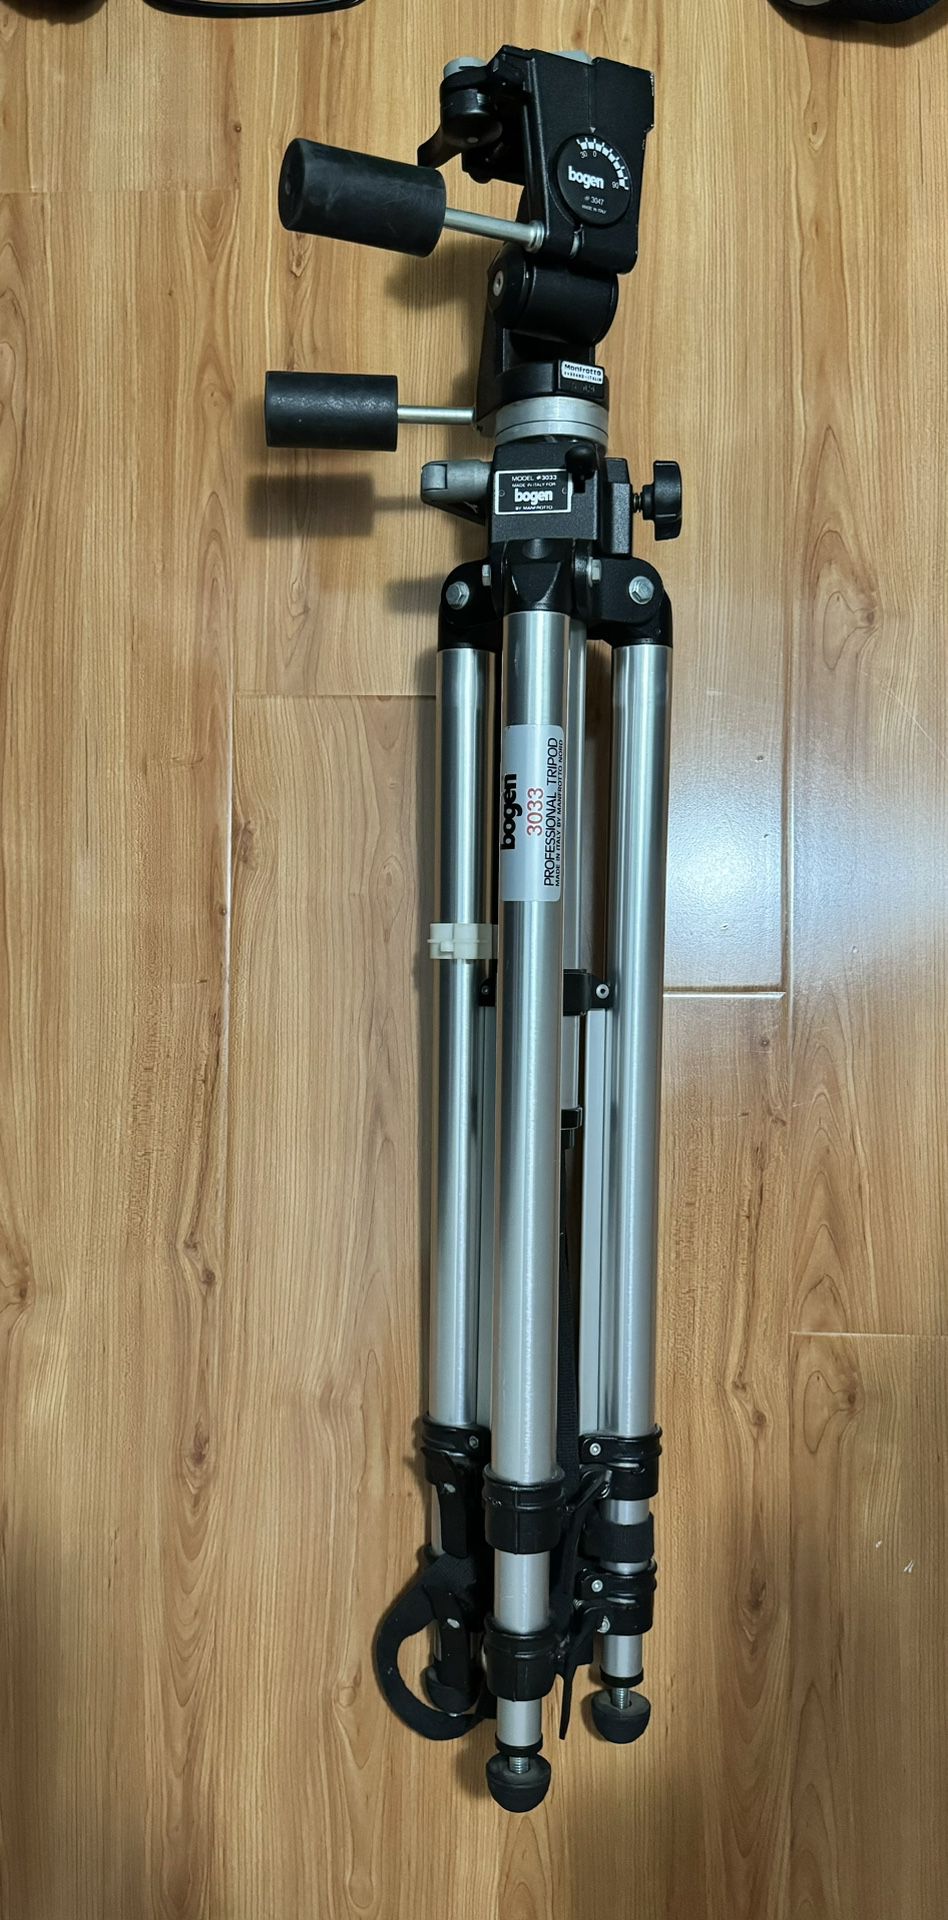  Oven 3033 tripod with 3047 head